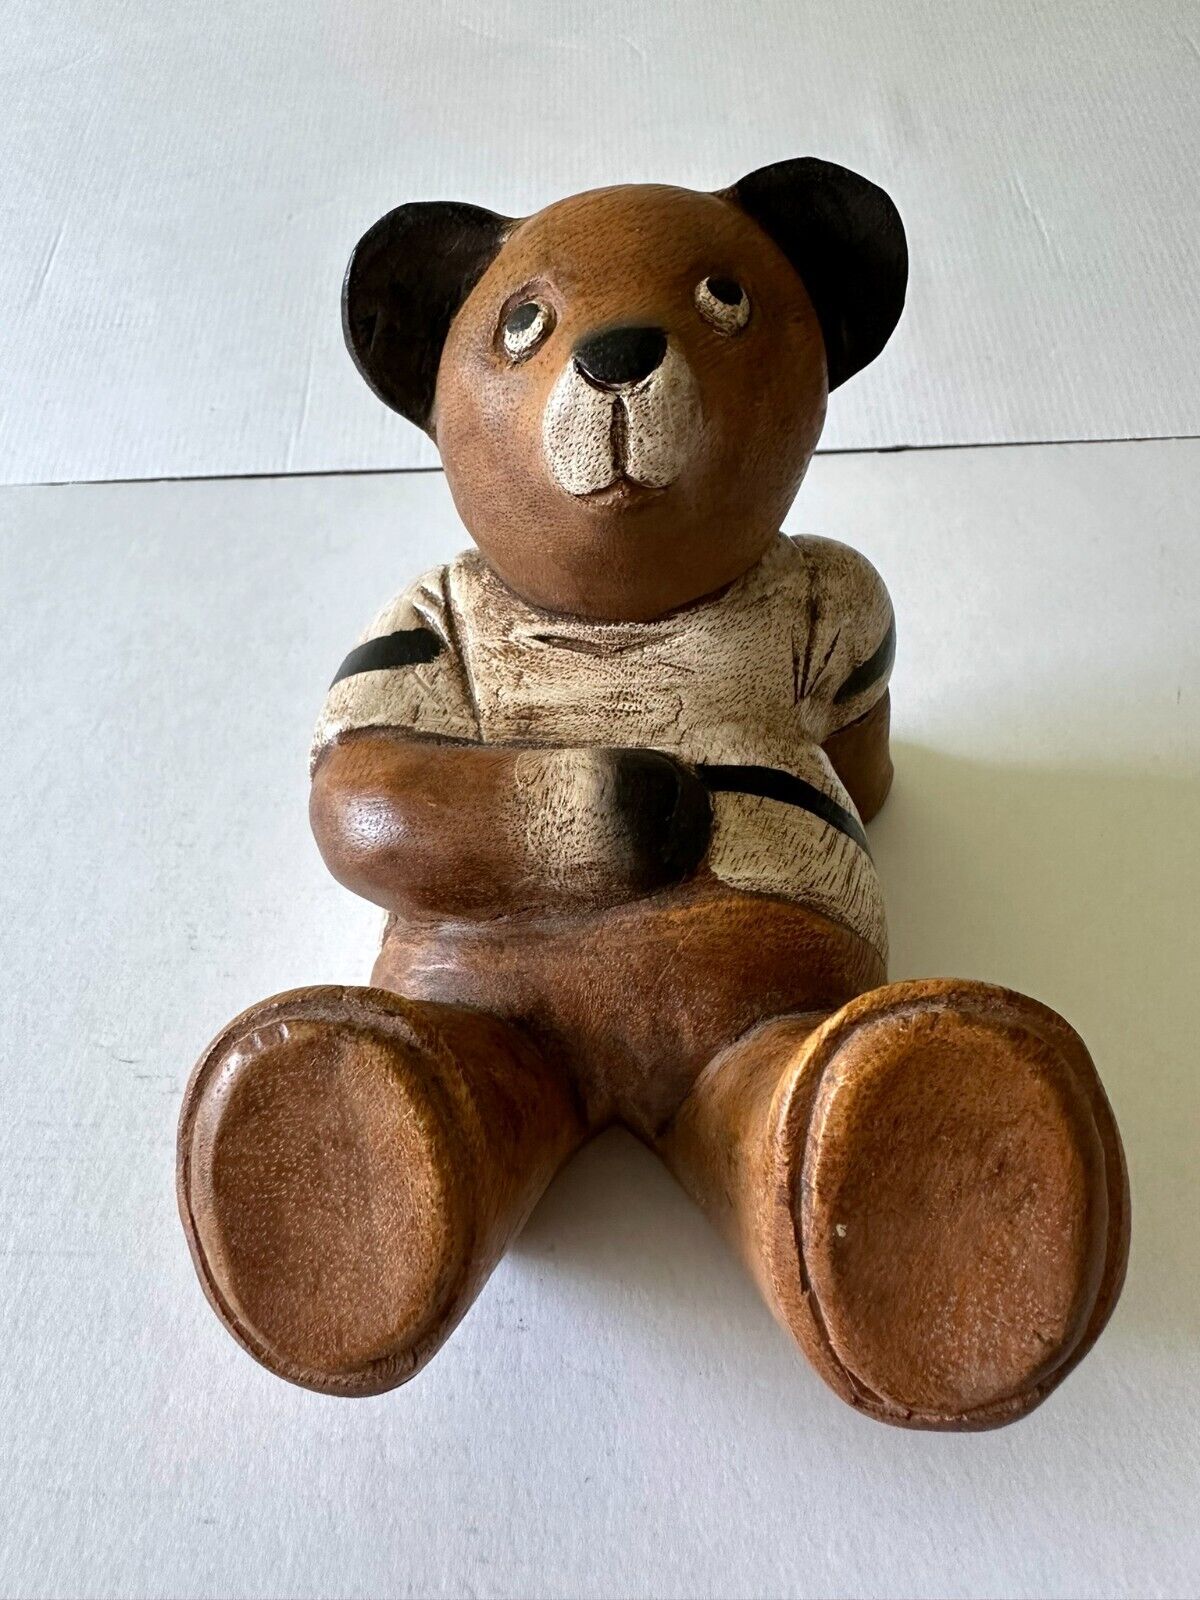 Wooden teddy bear sculpture 5.5 inches tall figurine Handmade painted carving